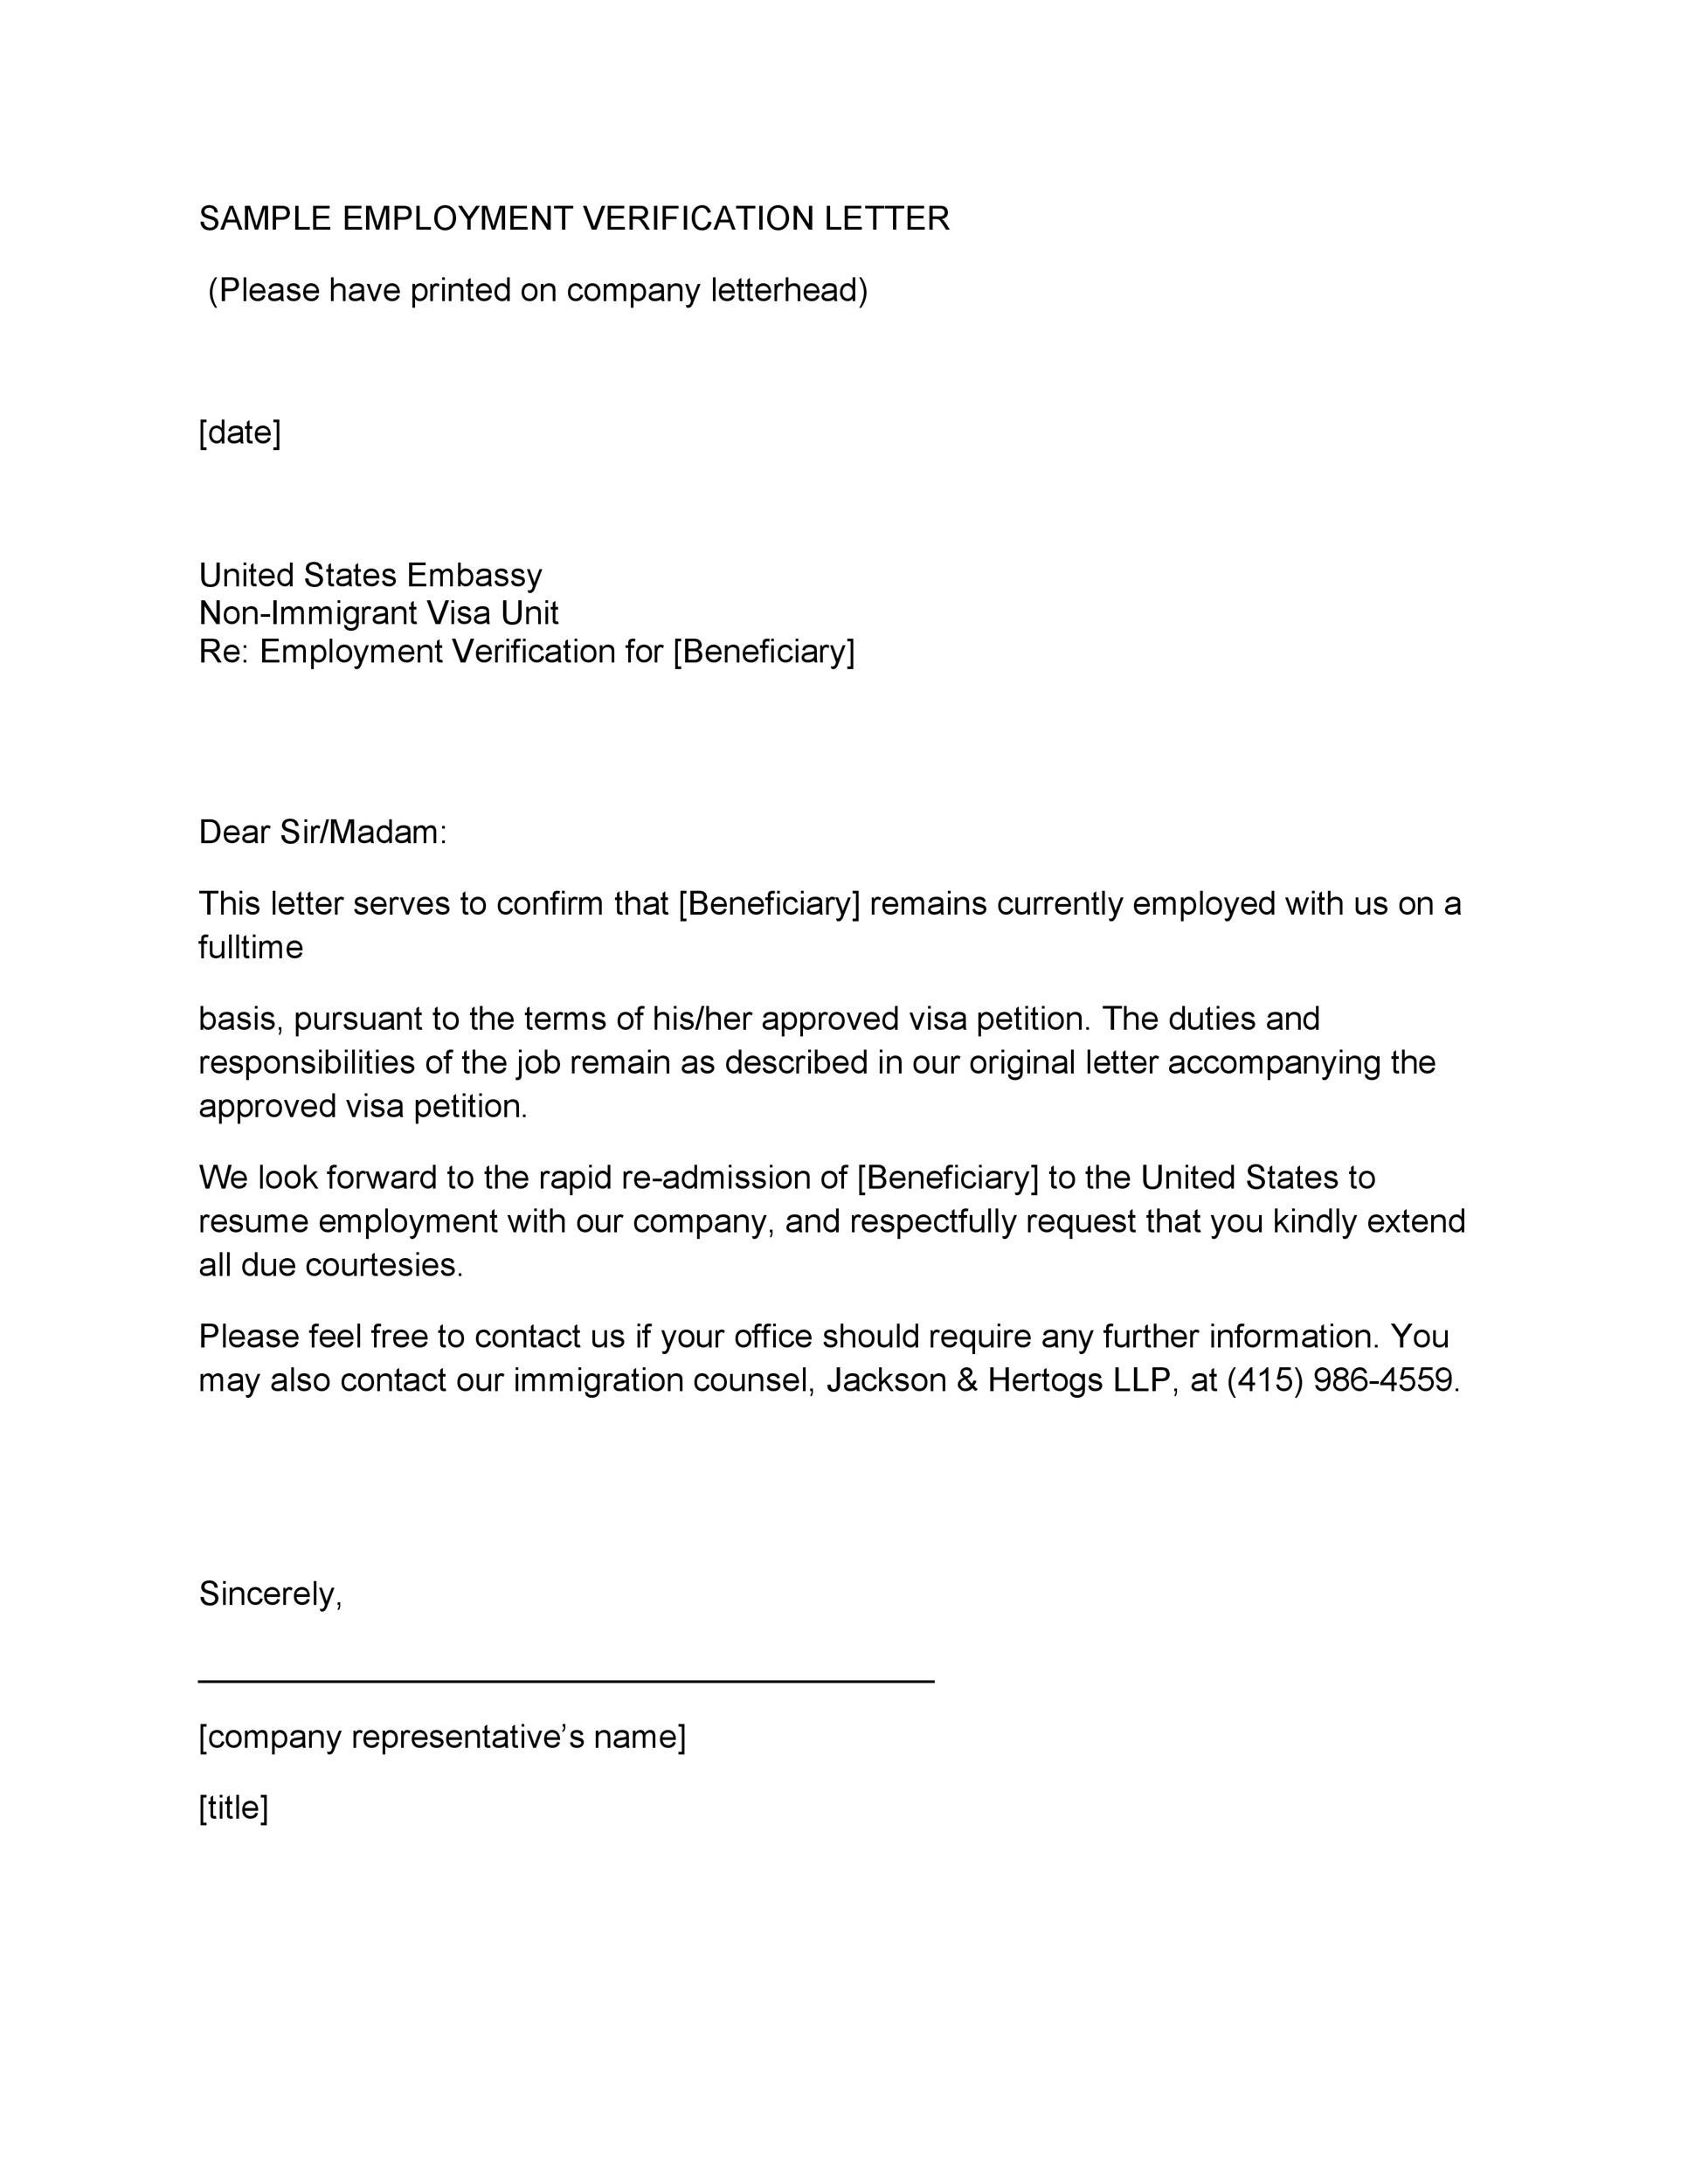 Attestation Letter For Employee from templatelab.com